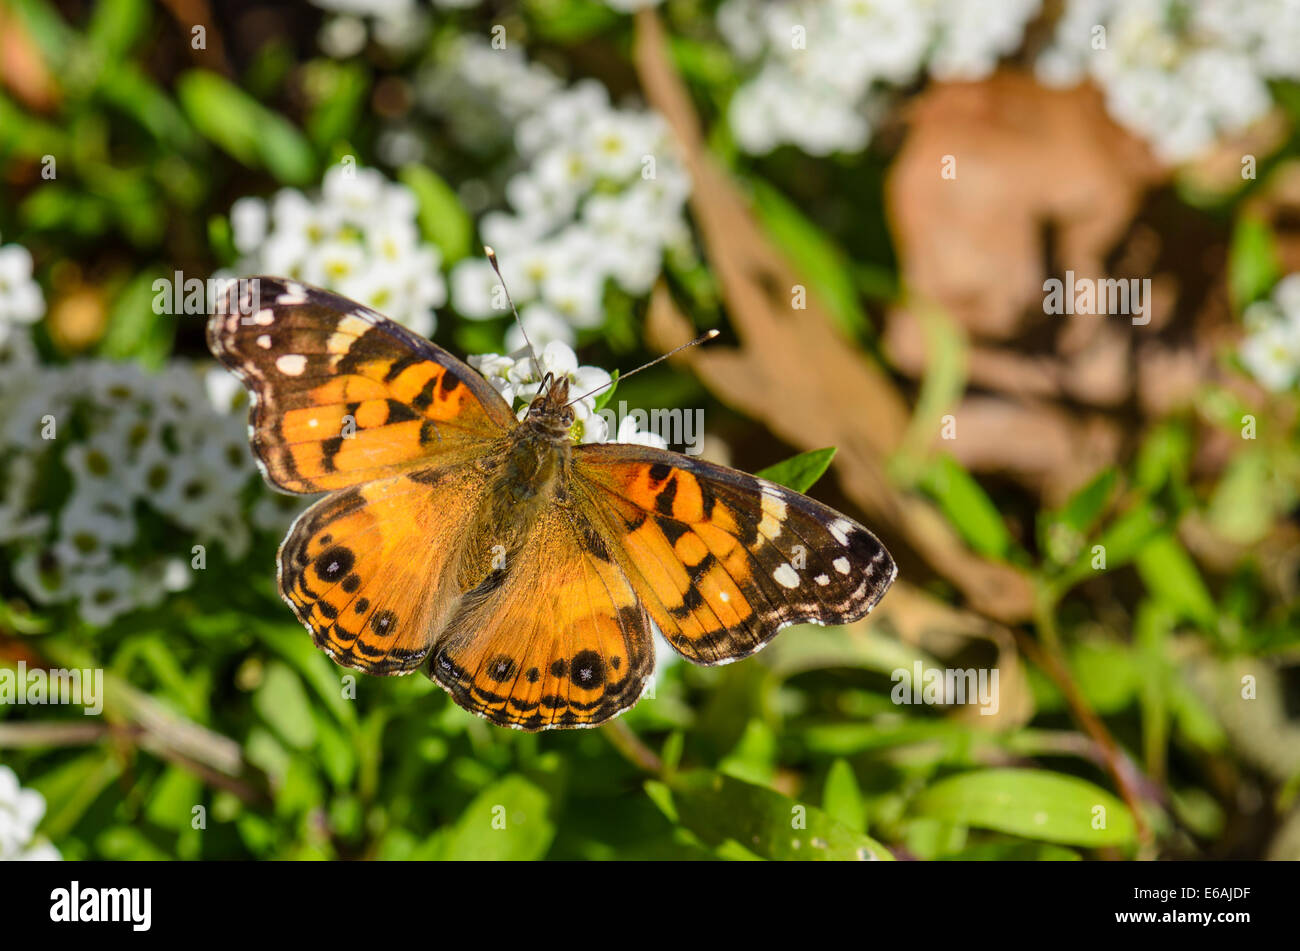 A Painted Lady butterfly, Vanessa cardui, nectaring on white flowers. Oklahoma, USA. Stock Photo